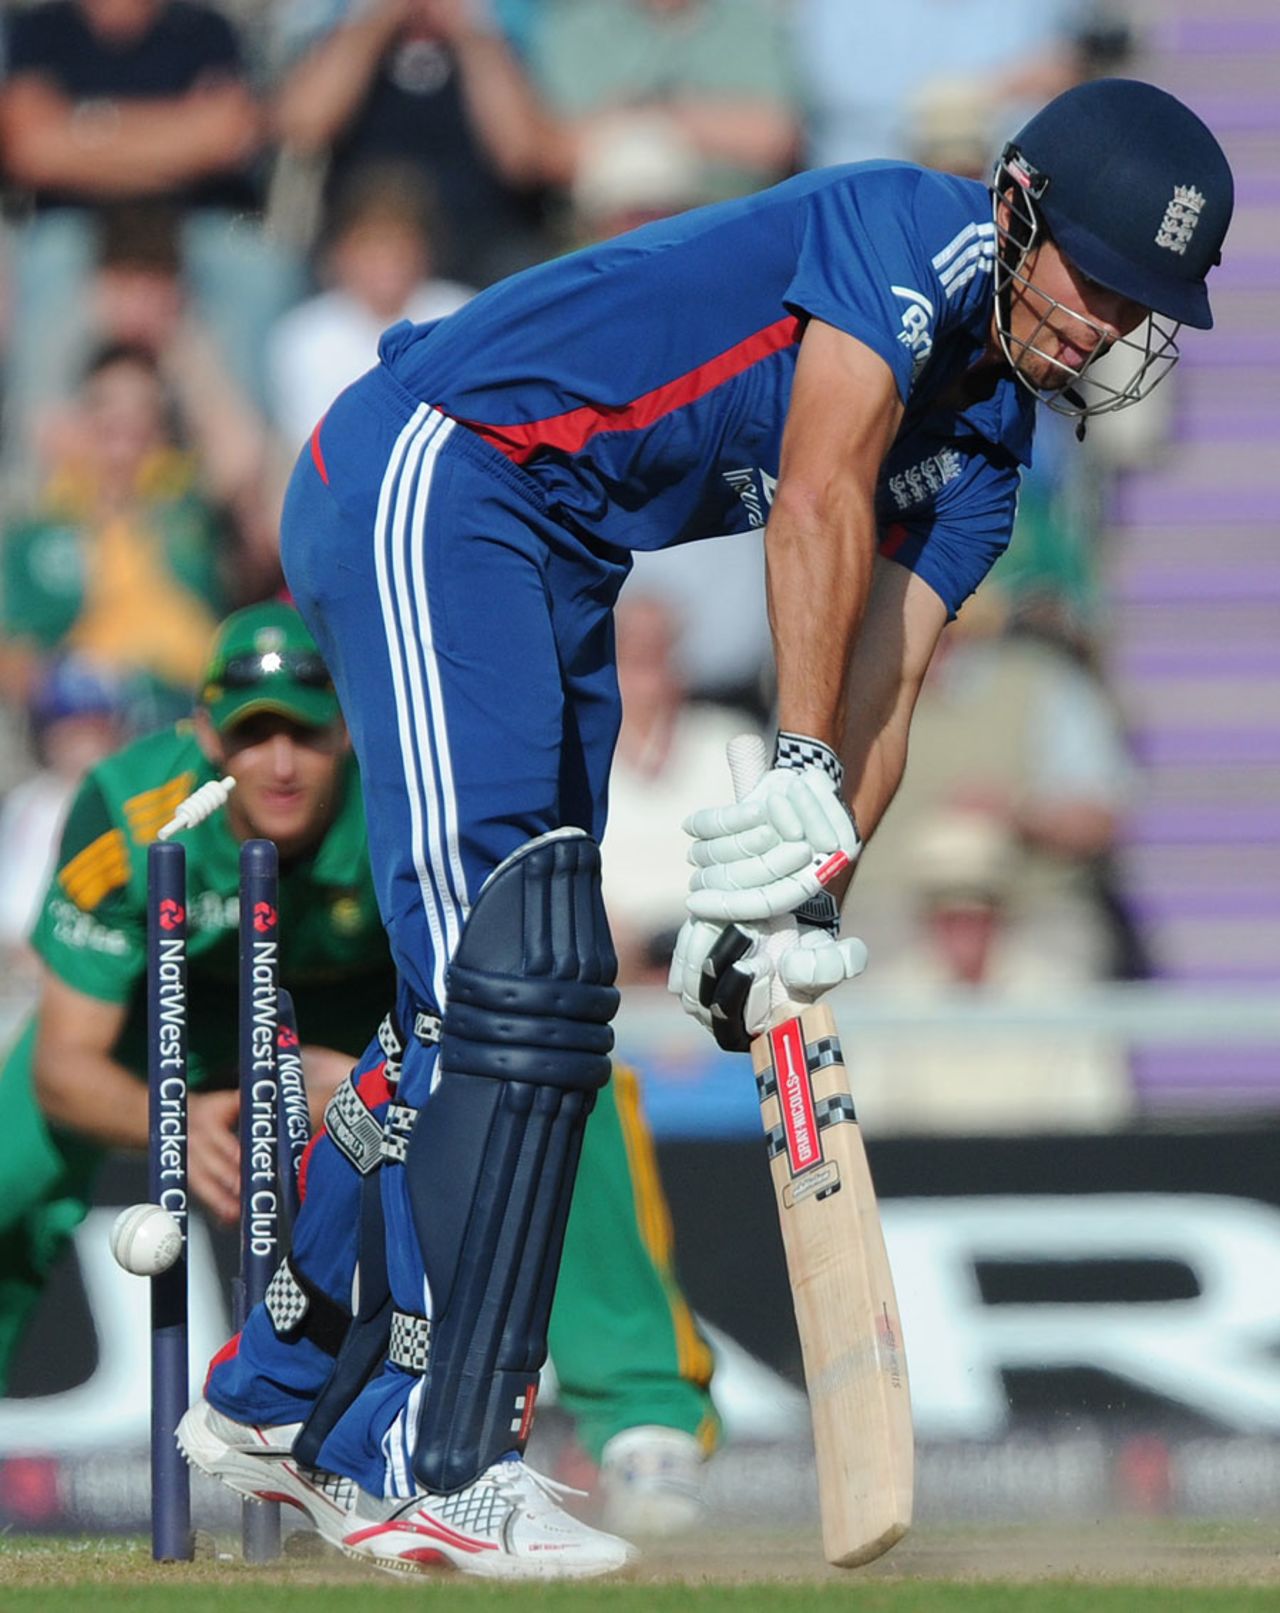 Alastair Cook was cleaned up second ball by Lonwabo Tsotsobe, England v South Africa, 2nd NatWest ODI, West End, August 28, 2012